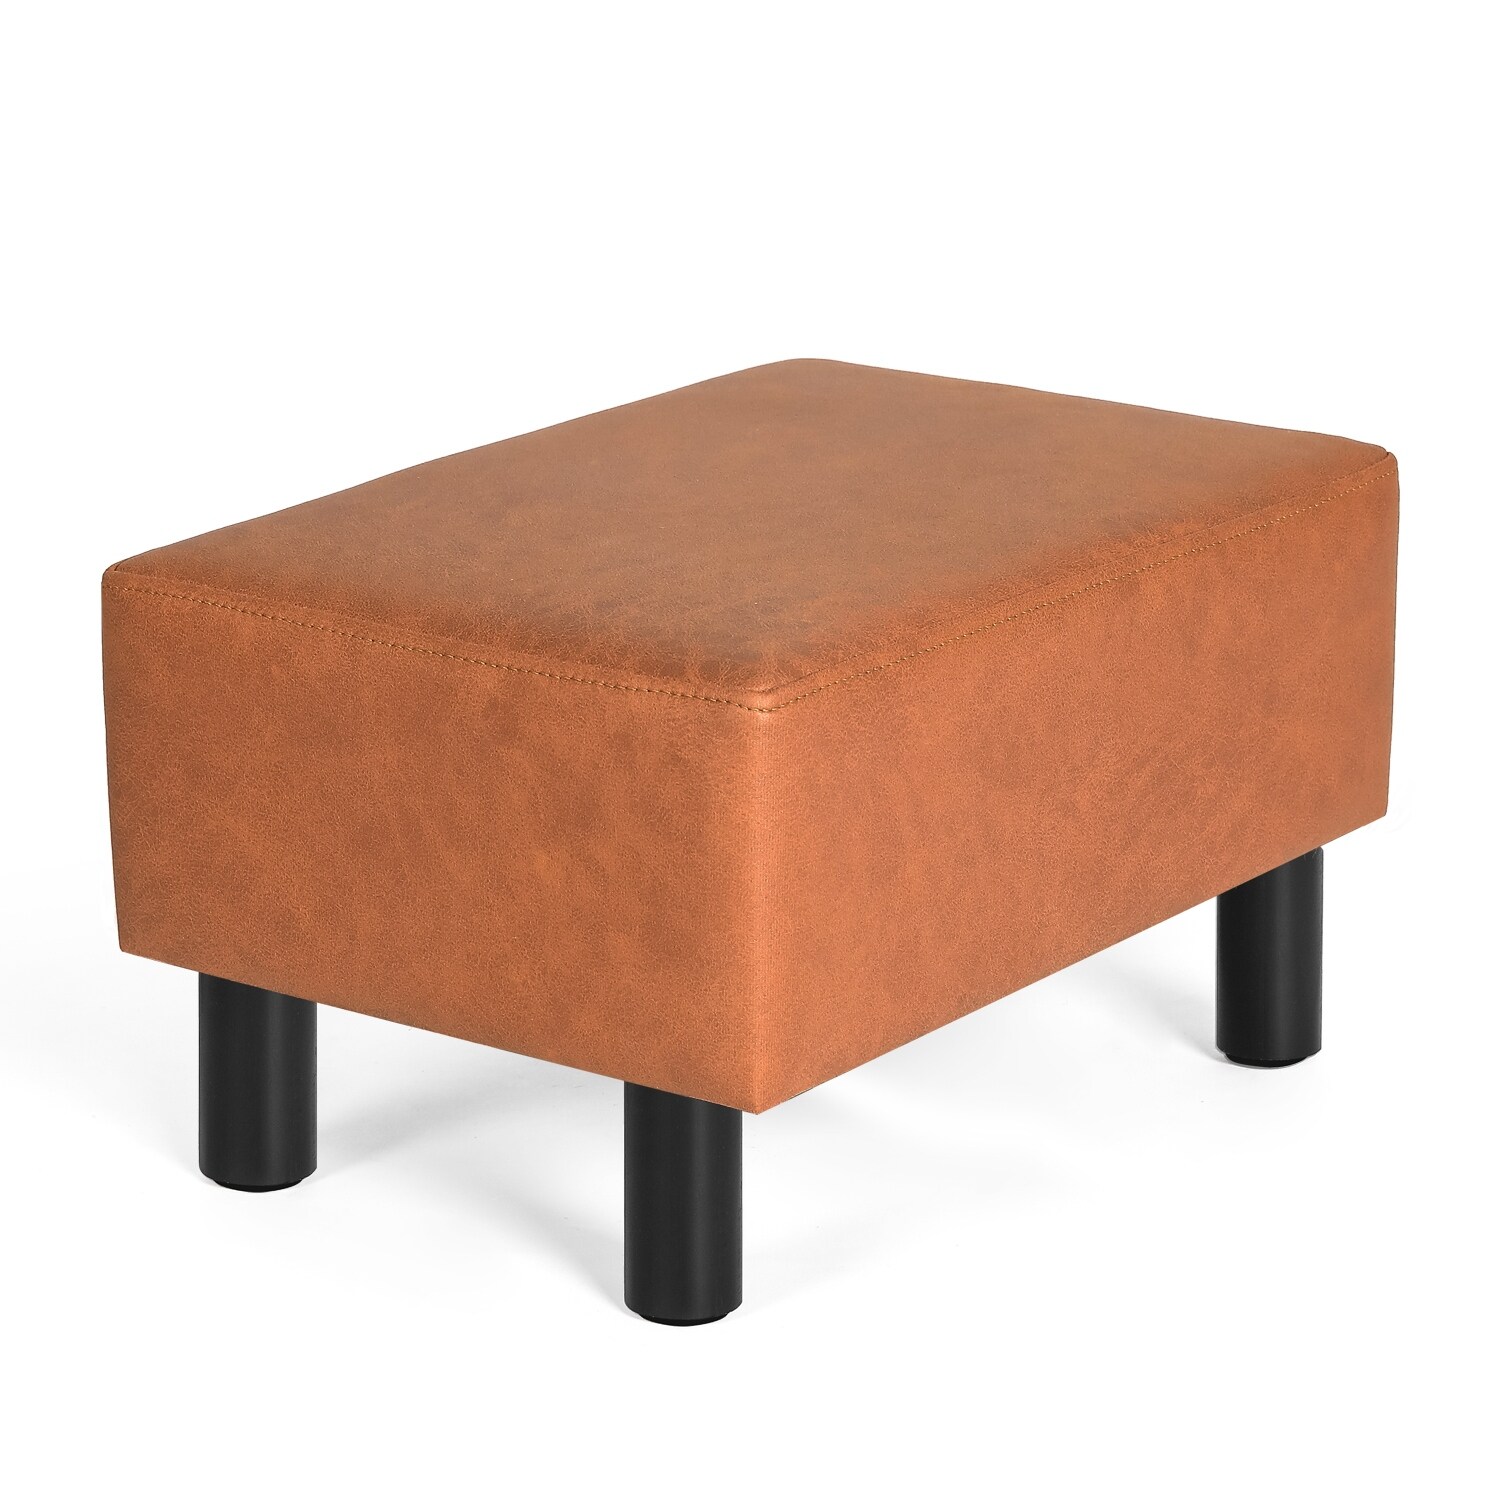 https://ak1.ostkcdn.com/images/products/is/images/direct/b47d45b19fb73bd00a9f8913052ee25c26de17b0/Adeco-Footstool-Ottoman-Faux-Leather-Foot-Rest-Stool.jpg